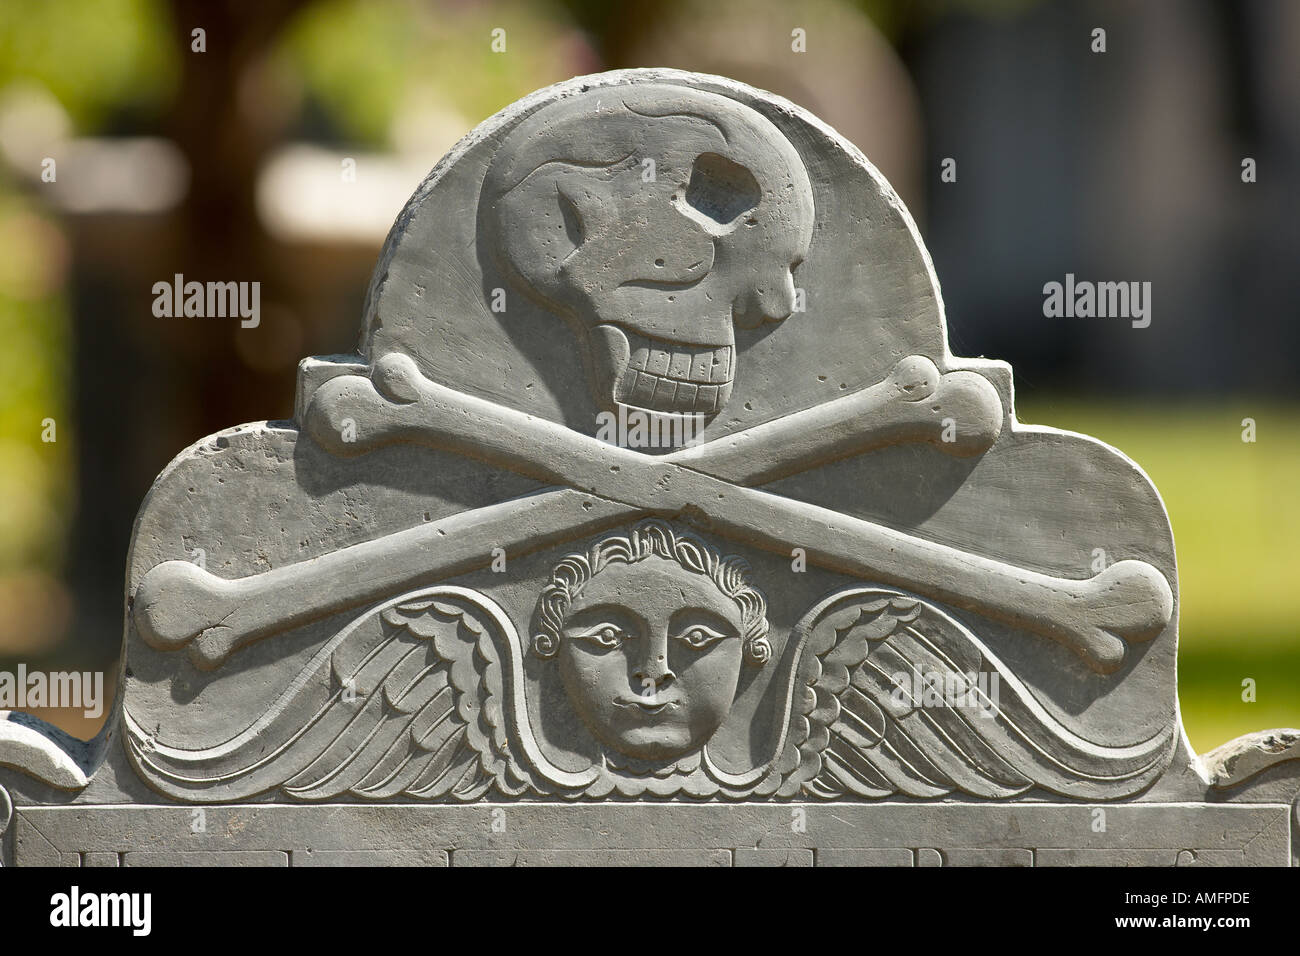 Grave stone with skull and bones Stock Photo